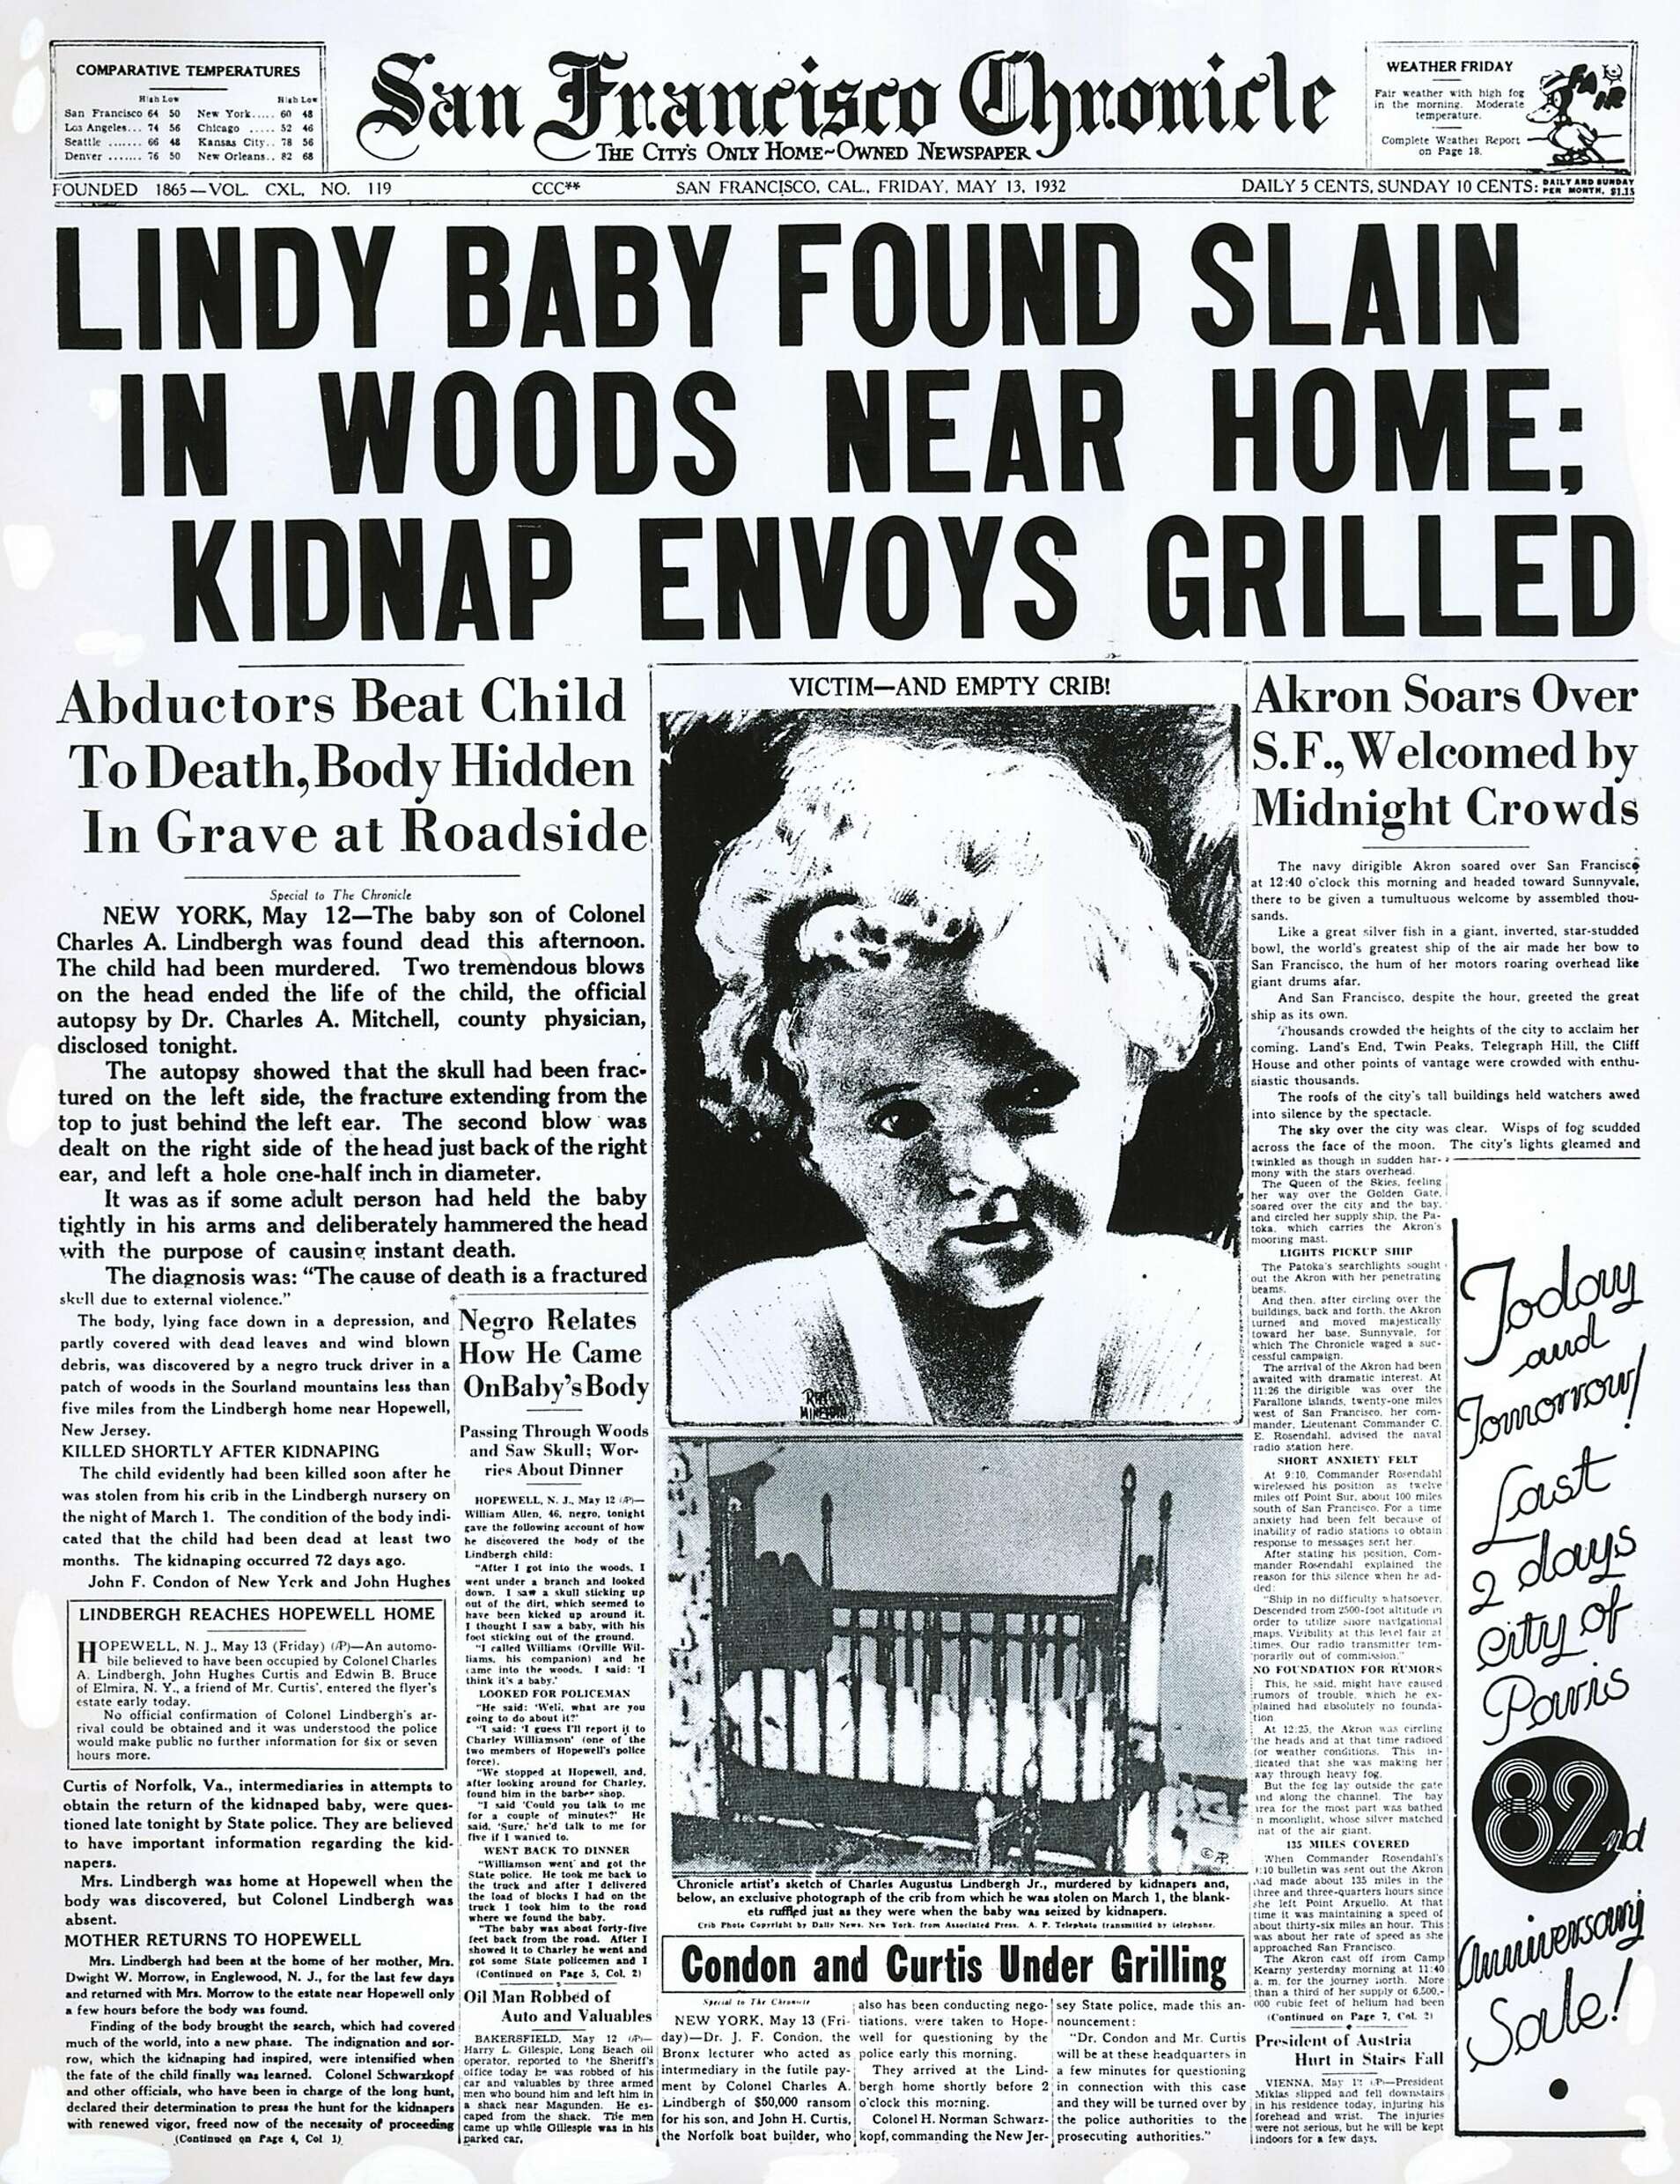 Chronicle Covers: The discovery of the Lindbergh baby's body